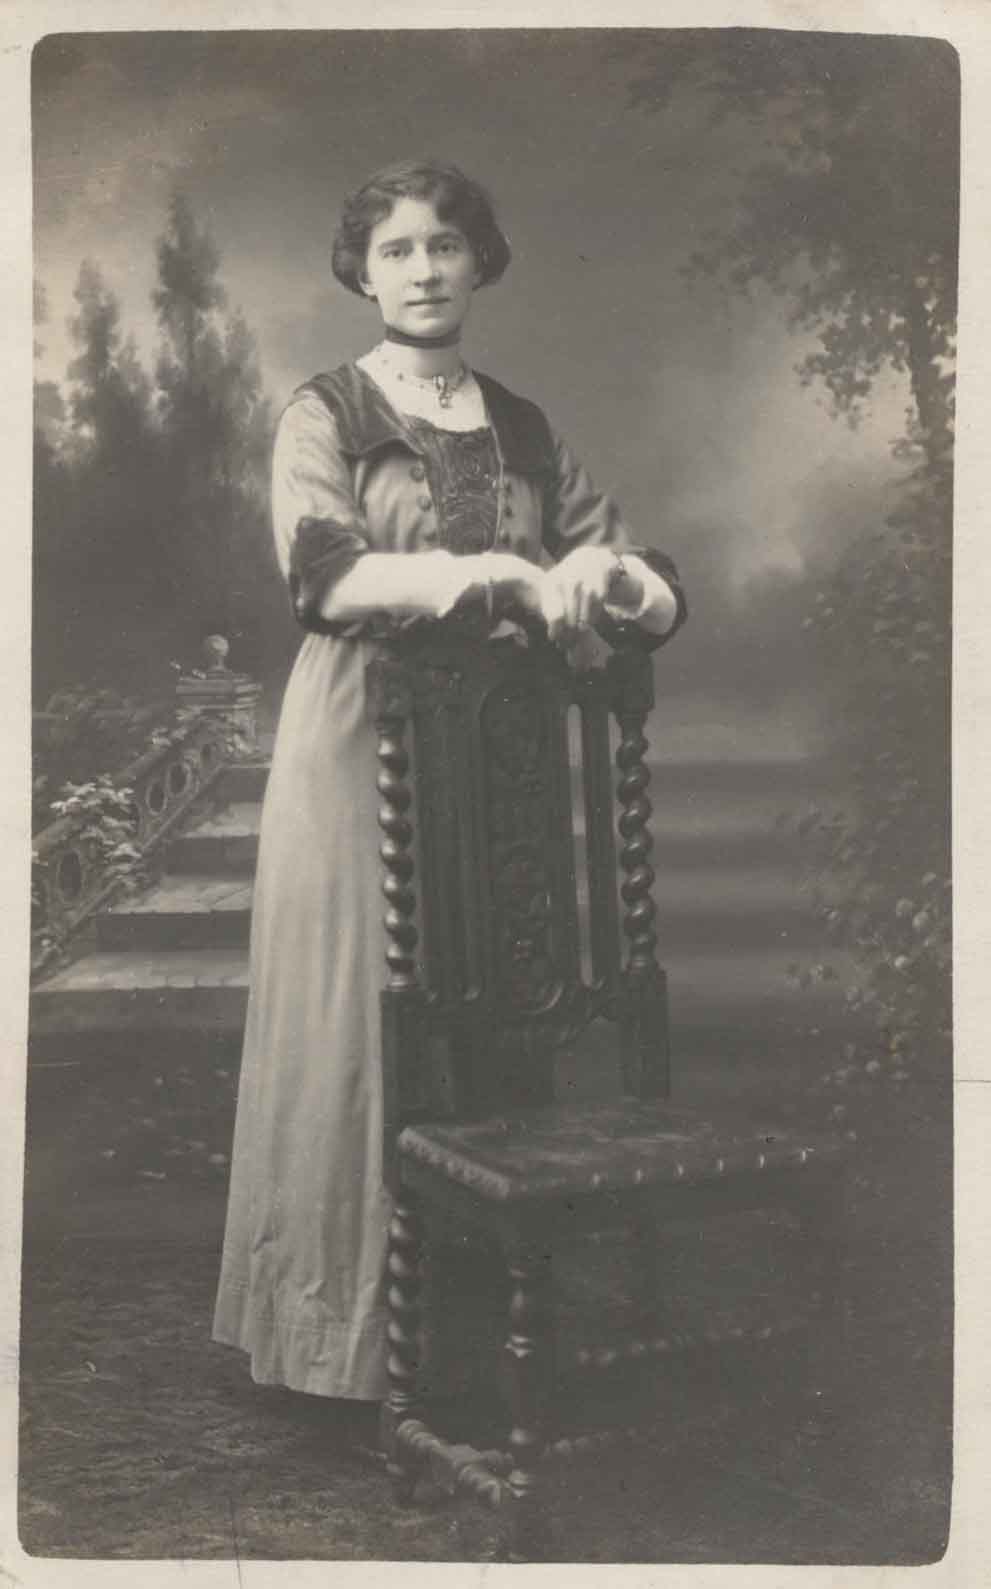 Kate in early 1900s